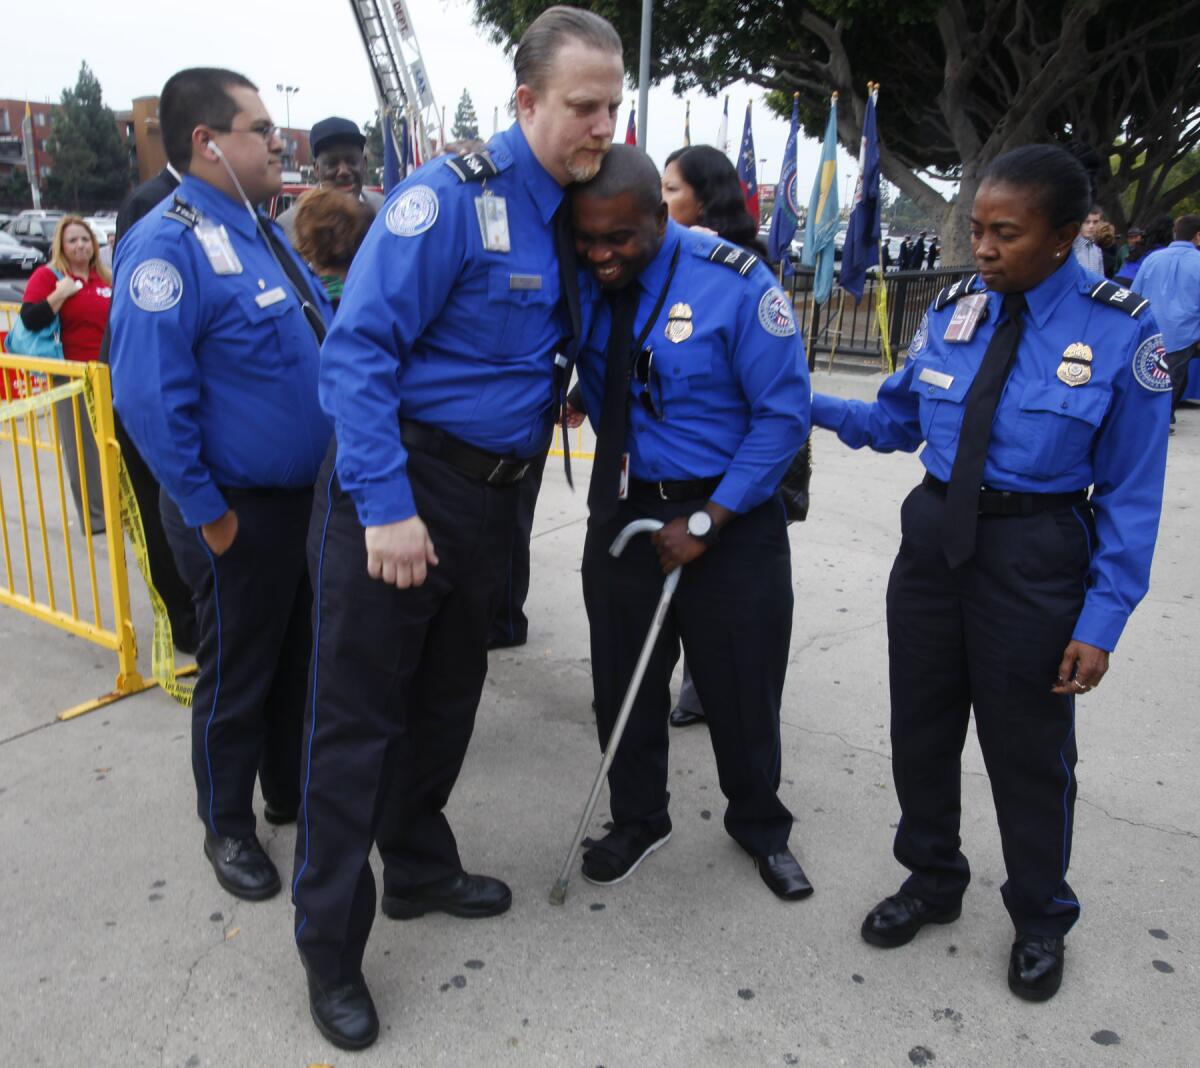 Wounded TSA Officer Tony Grigsby, center, is greeted by fellow officers as he arrives for the public memorial service for slain Transportation Security Administration agent Gerardo Hernandez at the Los Angeles Sports Arena on Tuesday.